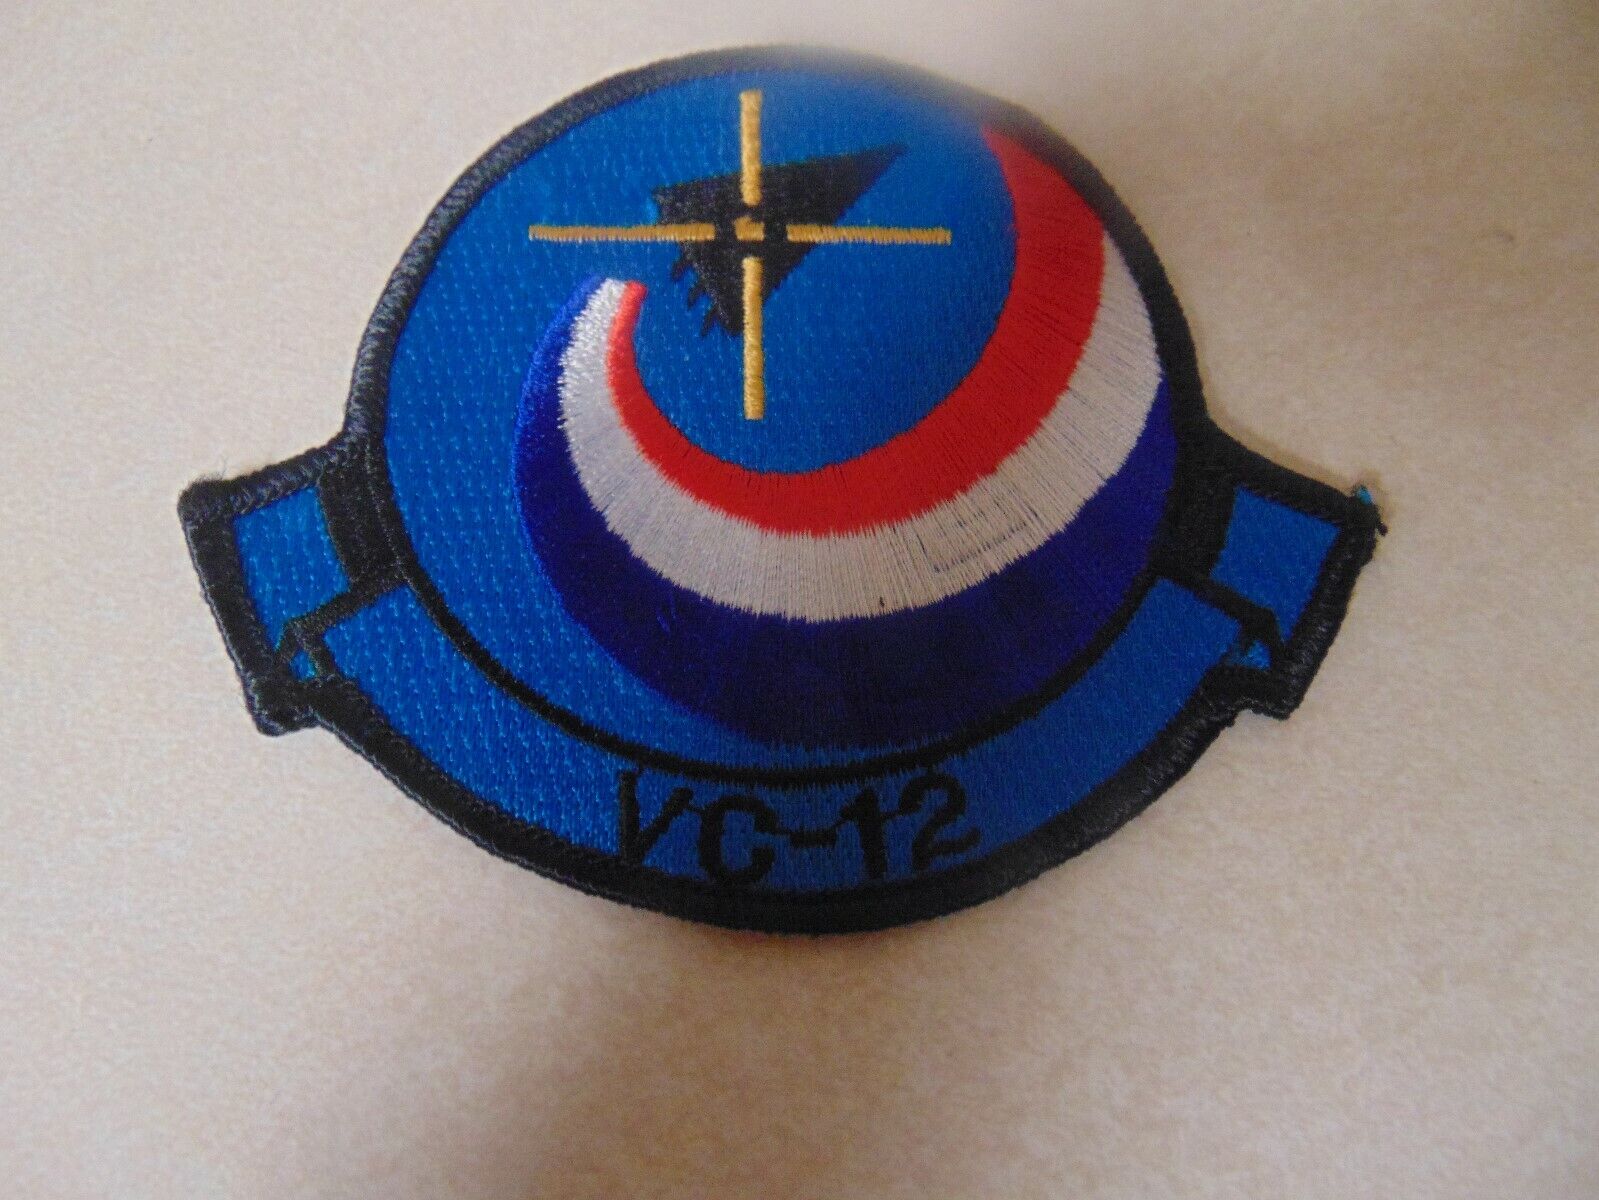 PATCH MILITARY OLDER US NAVY VC-12